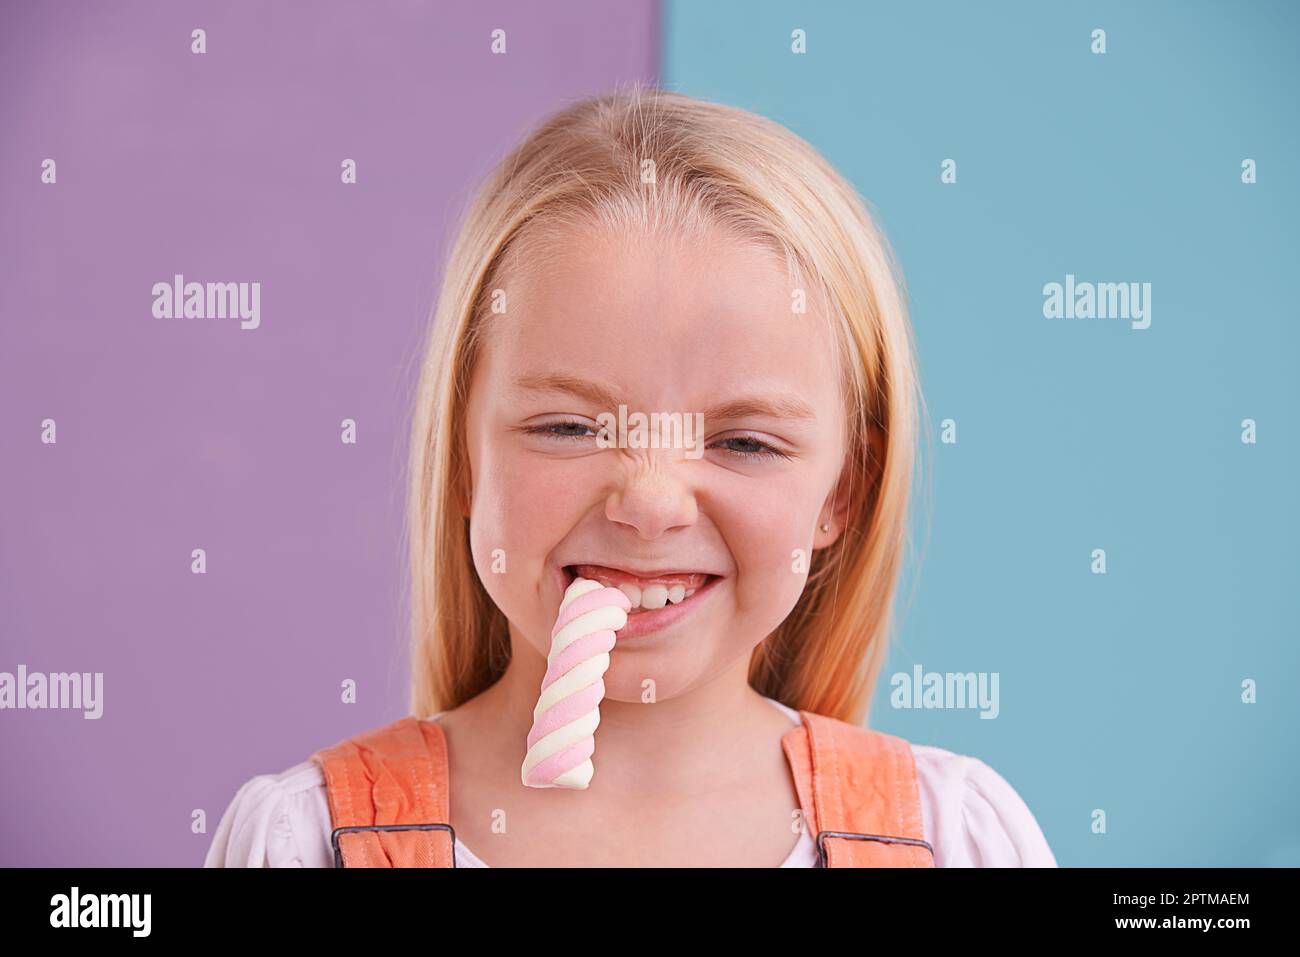 Om nom nom. A cute little girl eating candy against a colorful background Stock Photo